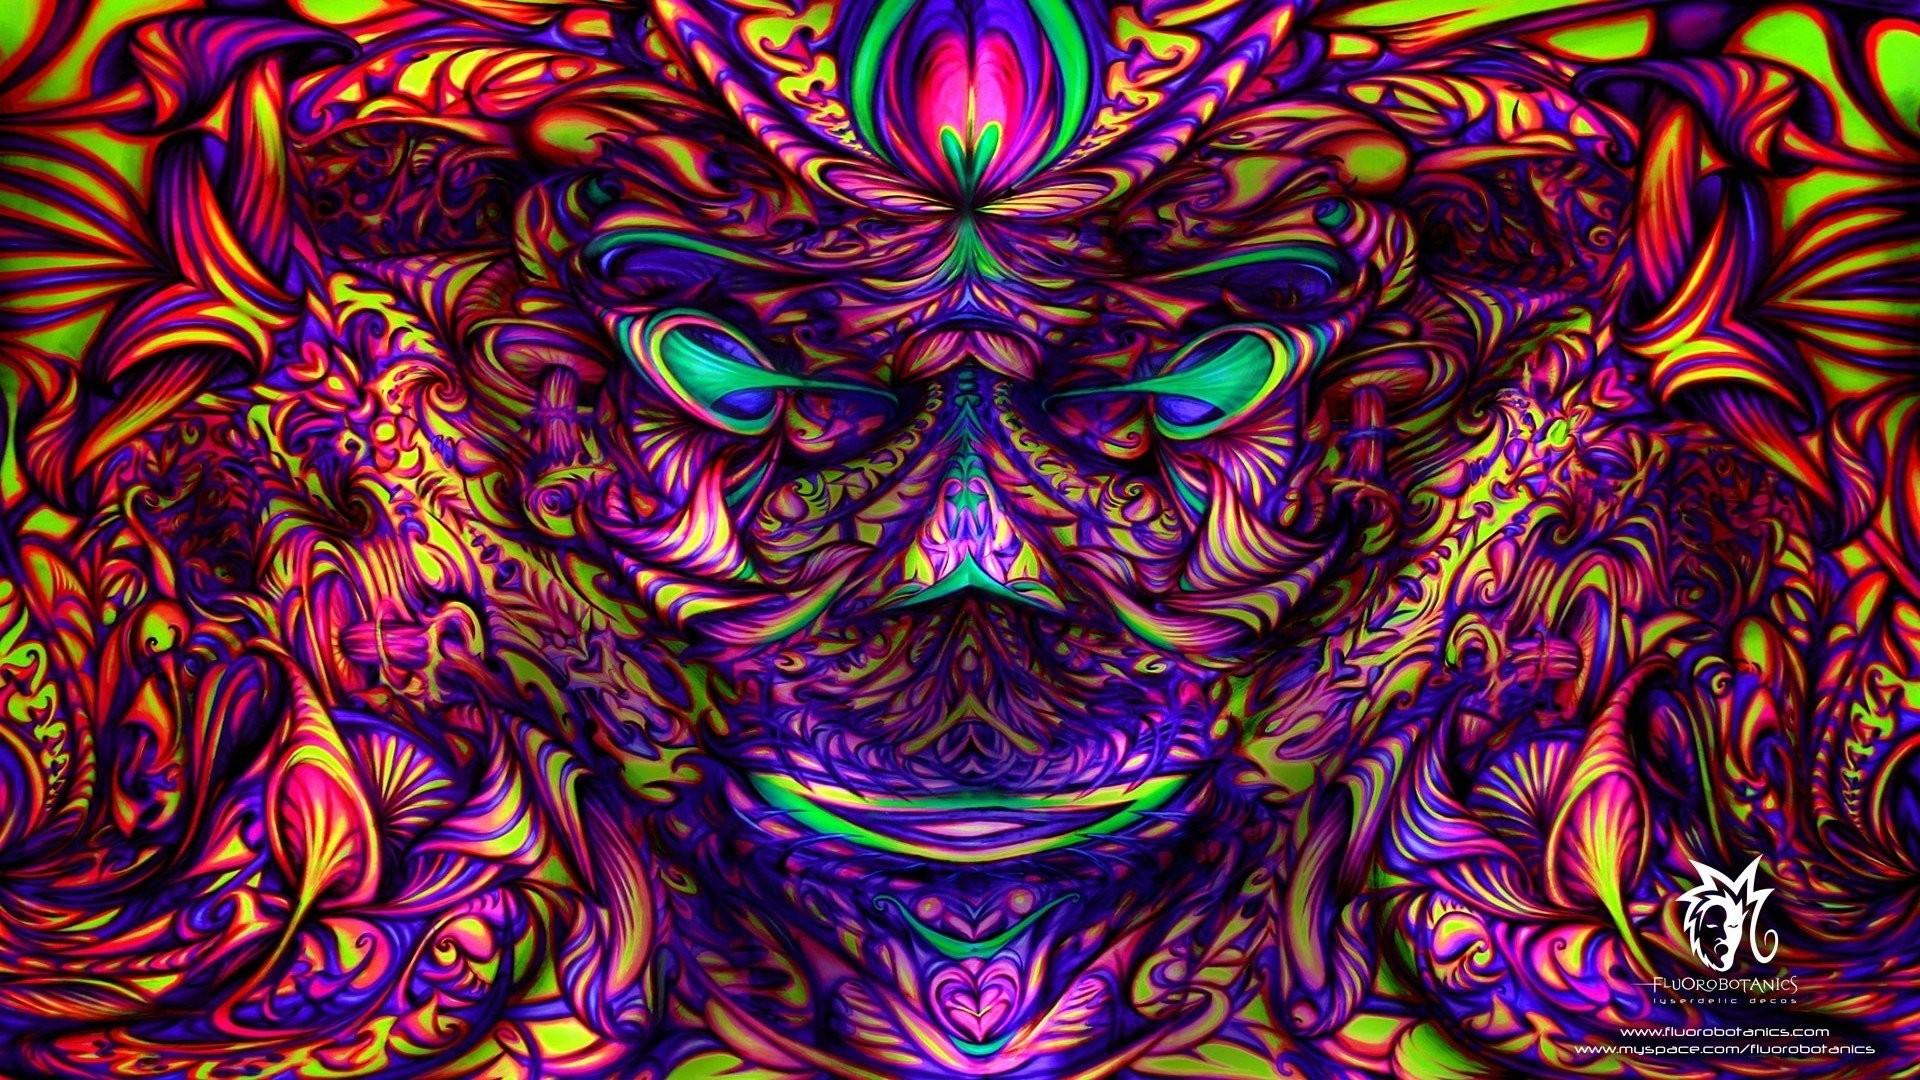 Rick And Morty Trippy Desktop Wallpapers - Wallpaper Cave